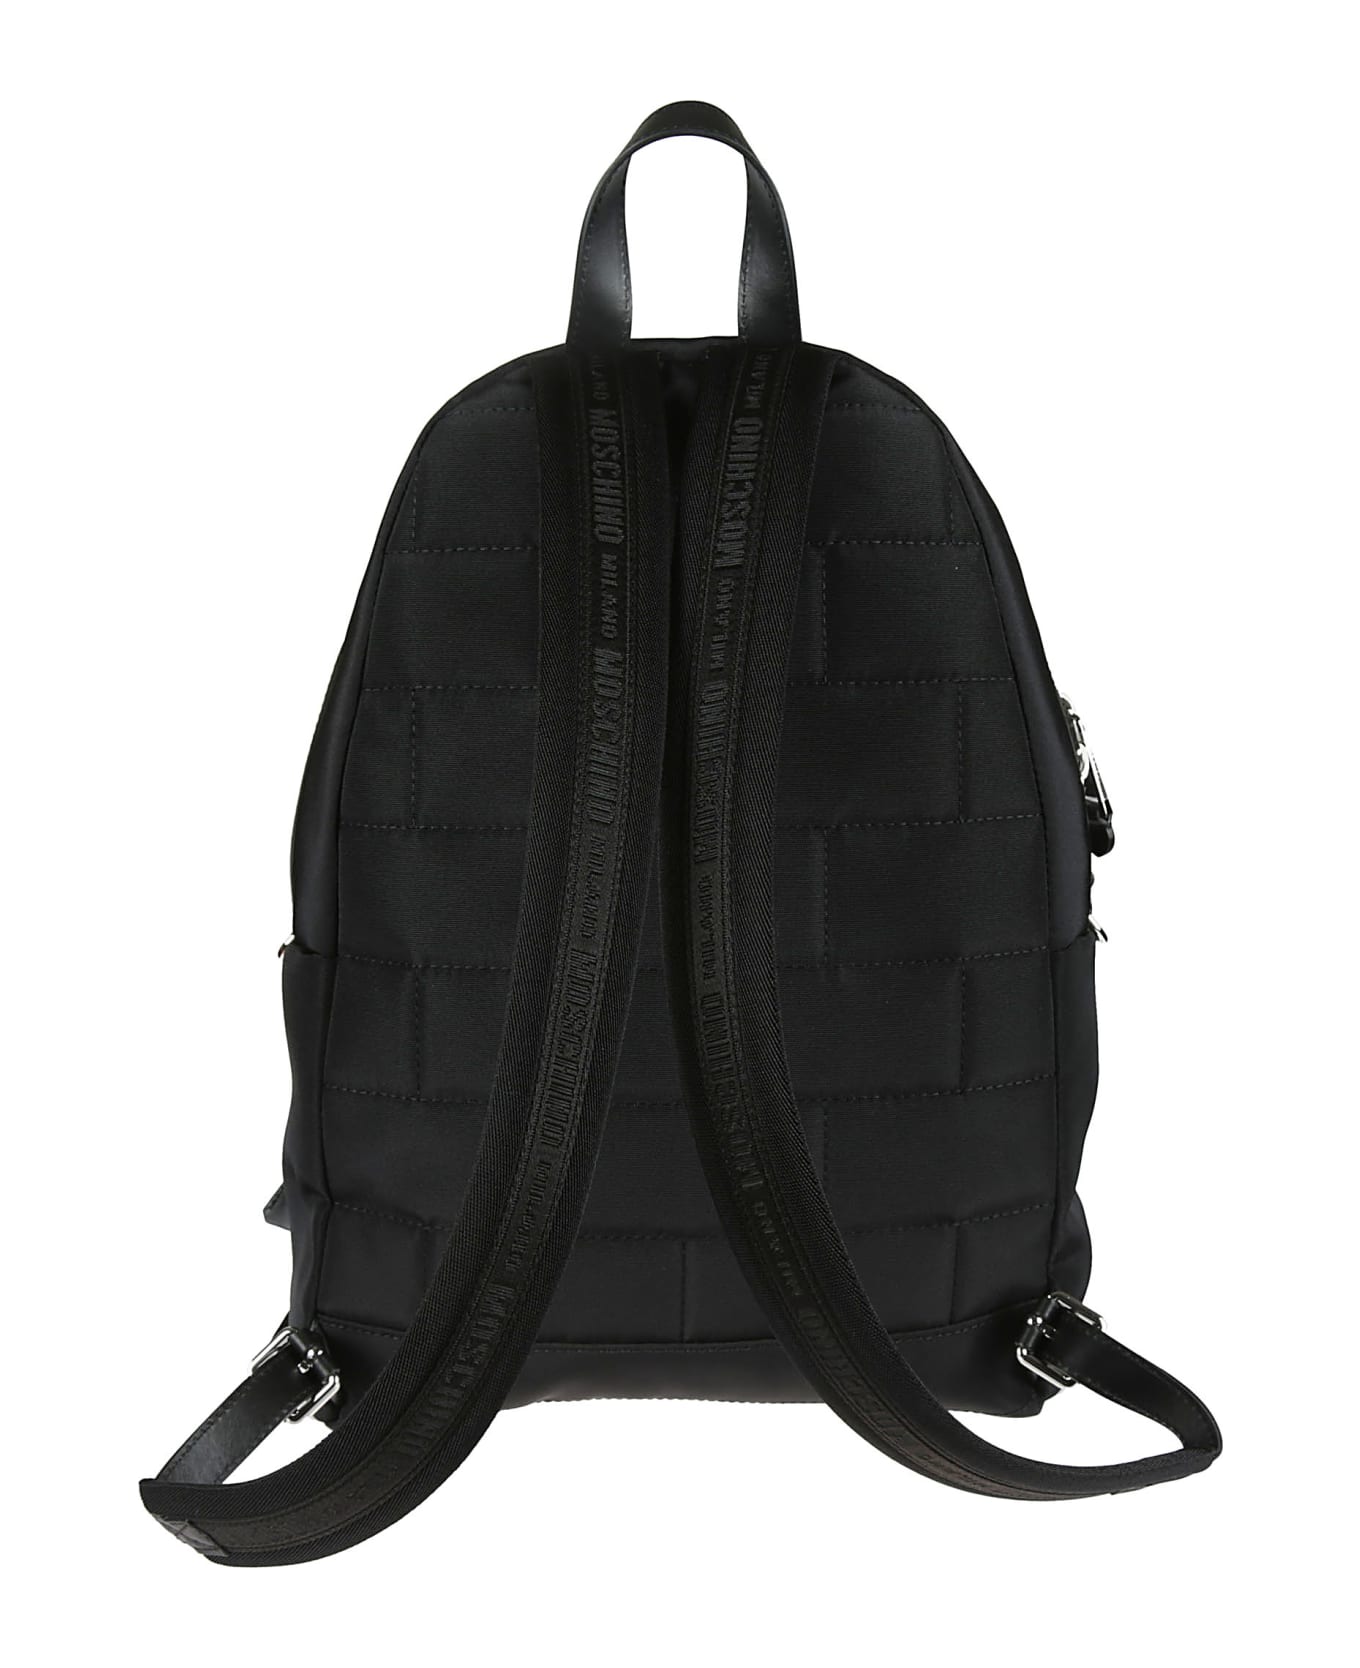 Moschino Couture Logo Backpack - Black